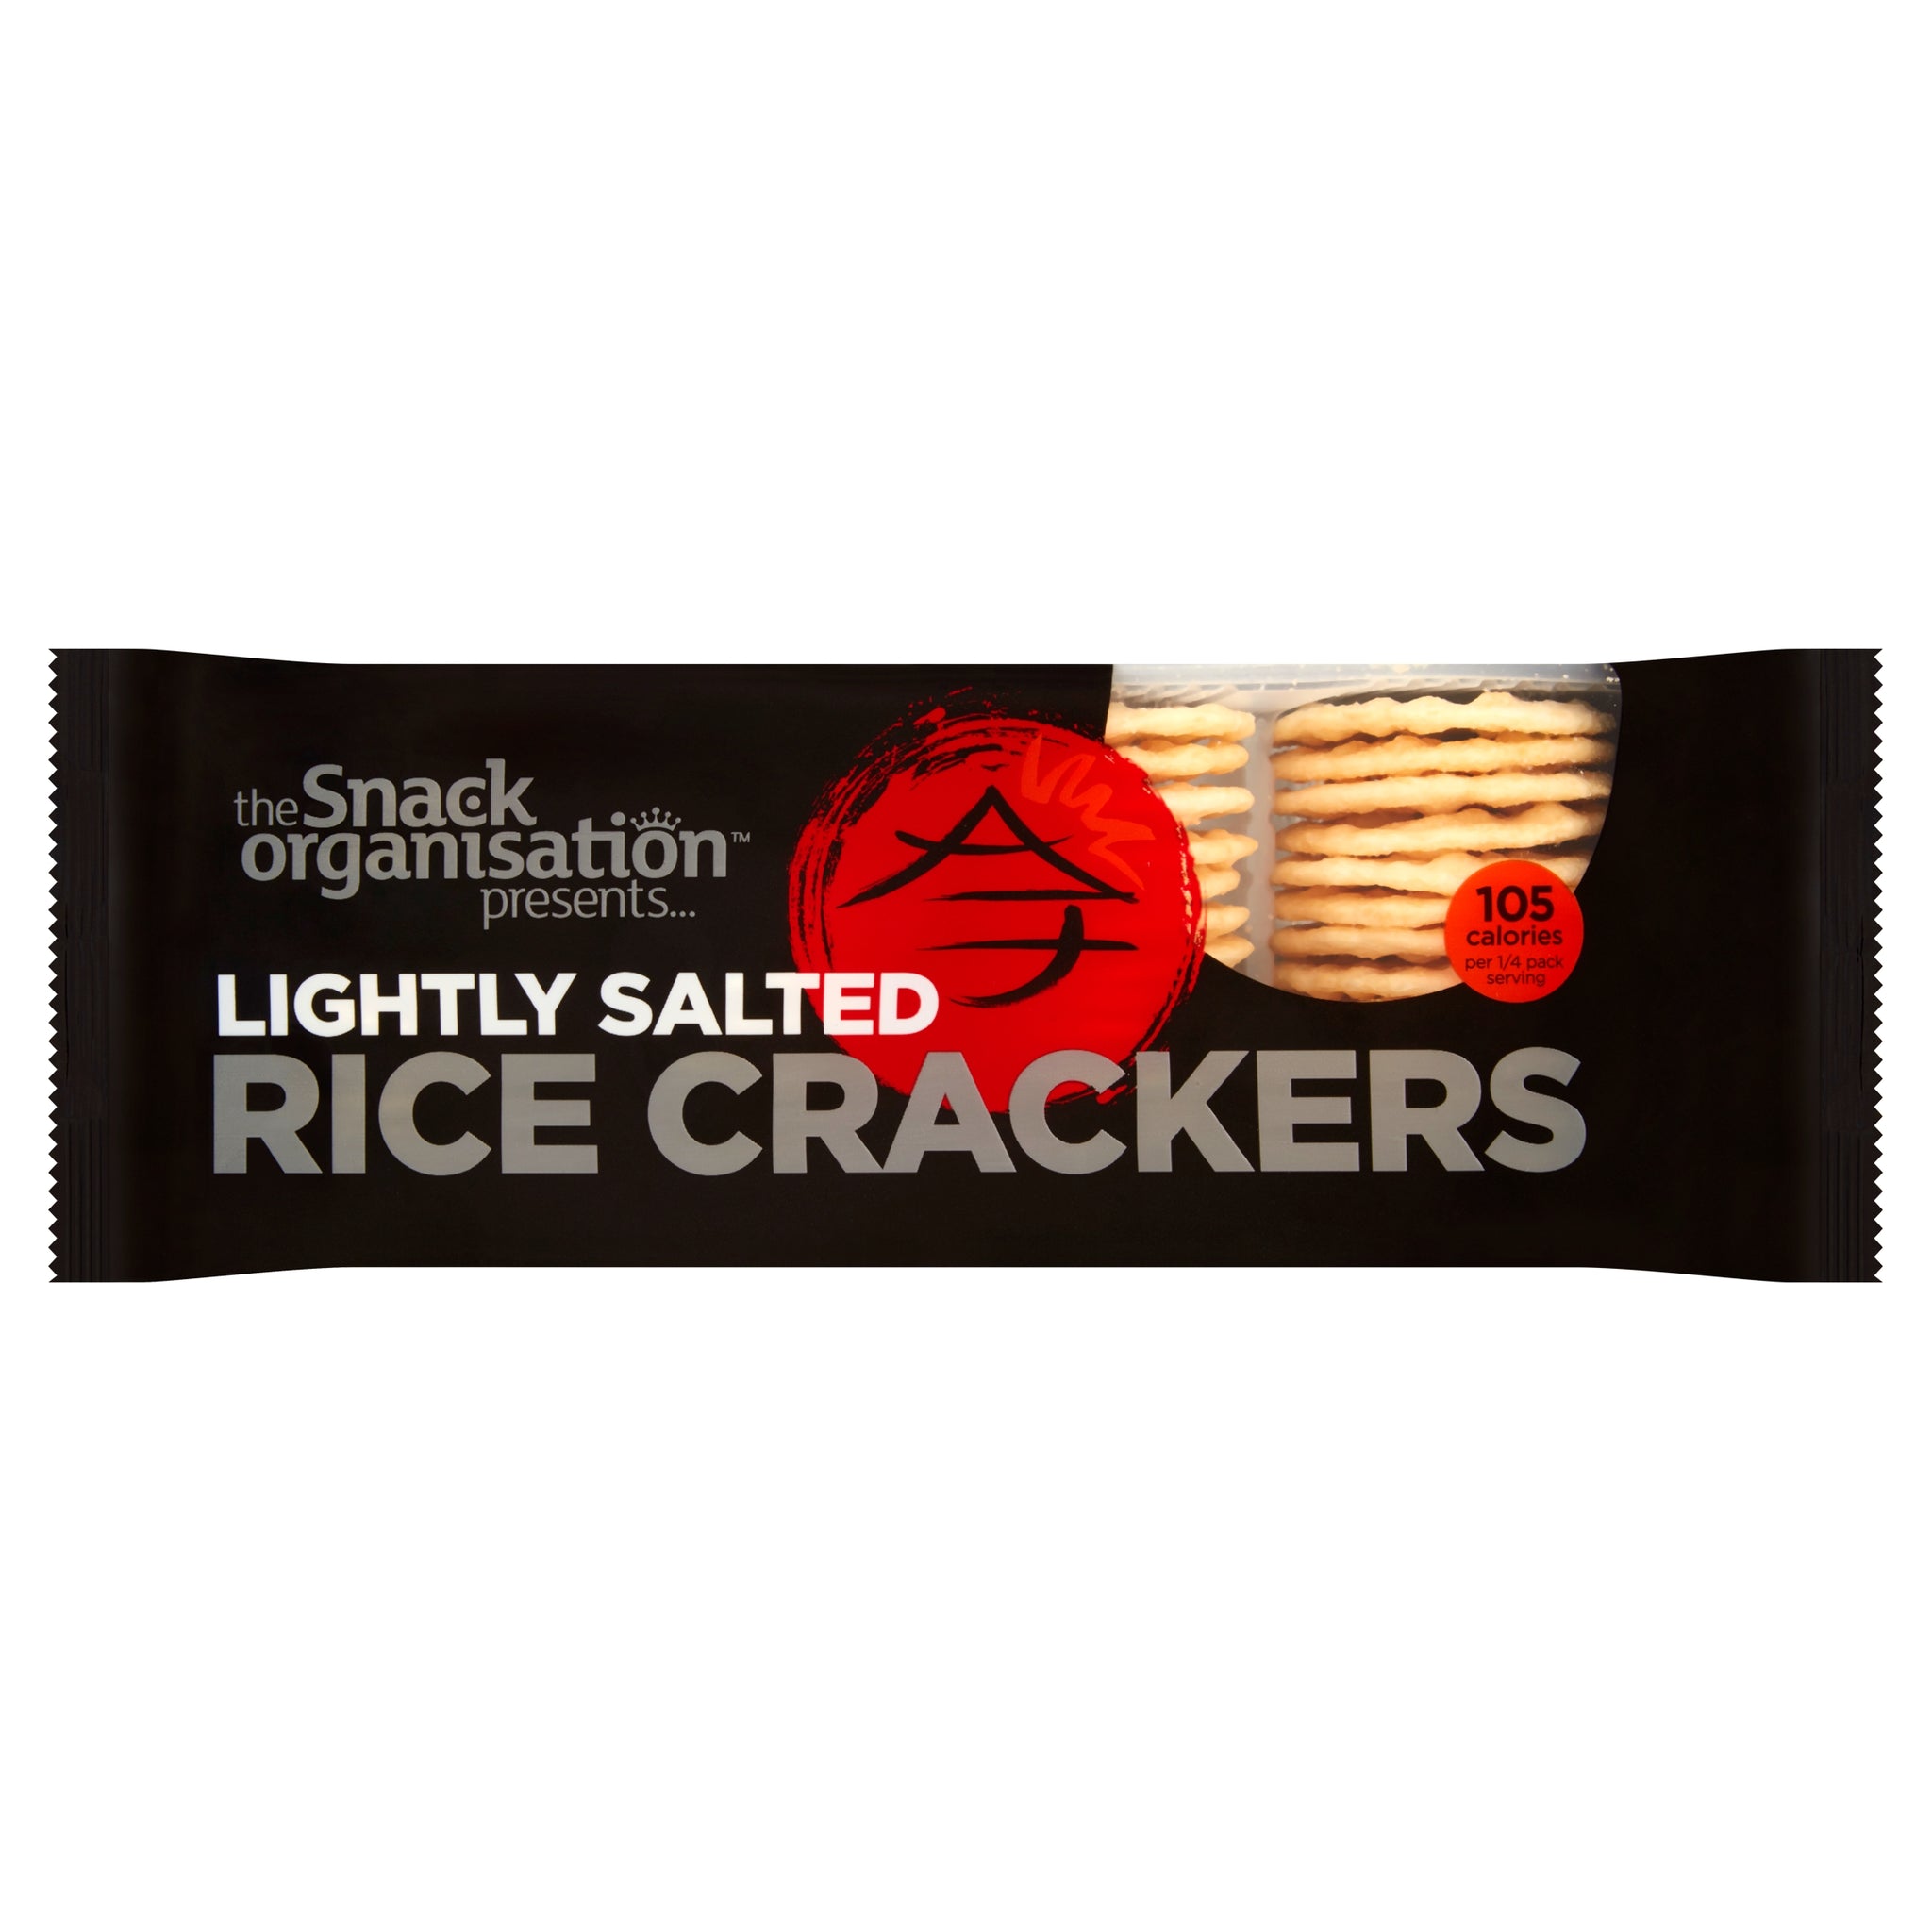 6x The Snack Org - Rice Crackers - Lightly Salted (6x 100g) - The Snack Organisation